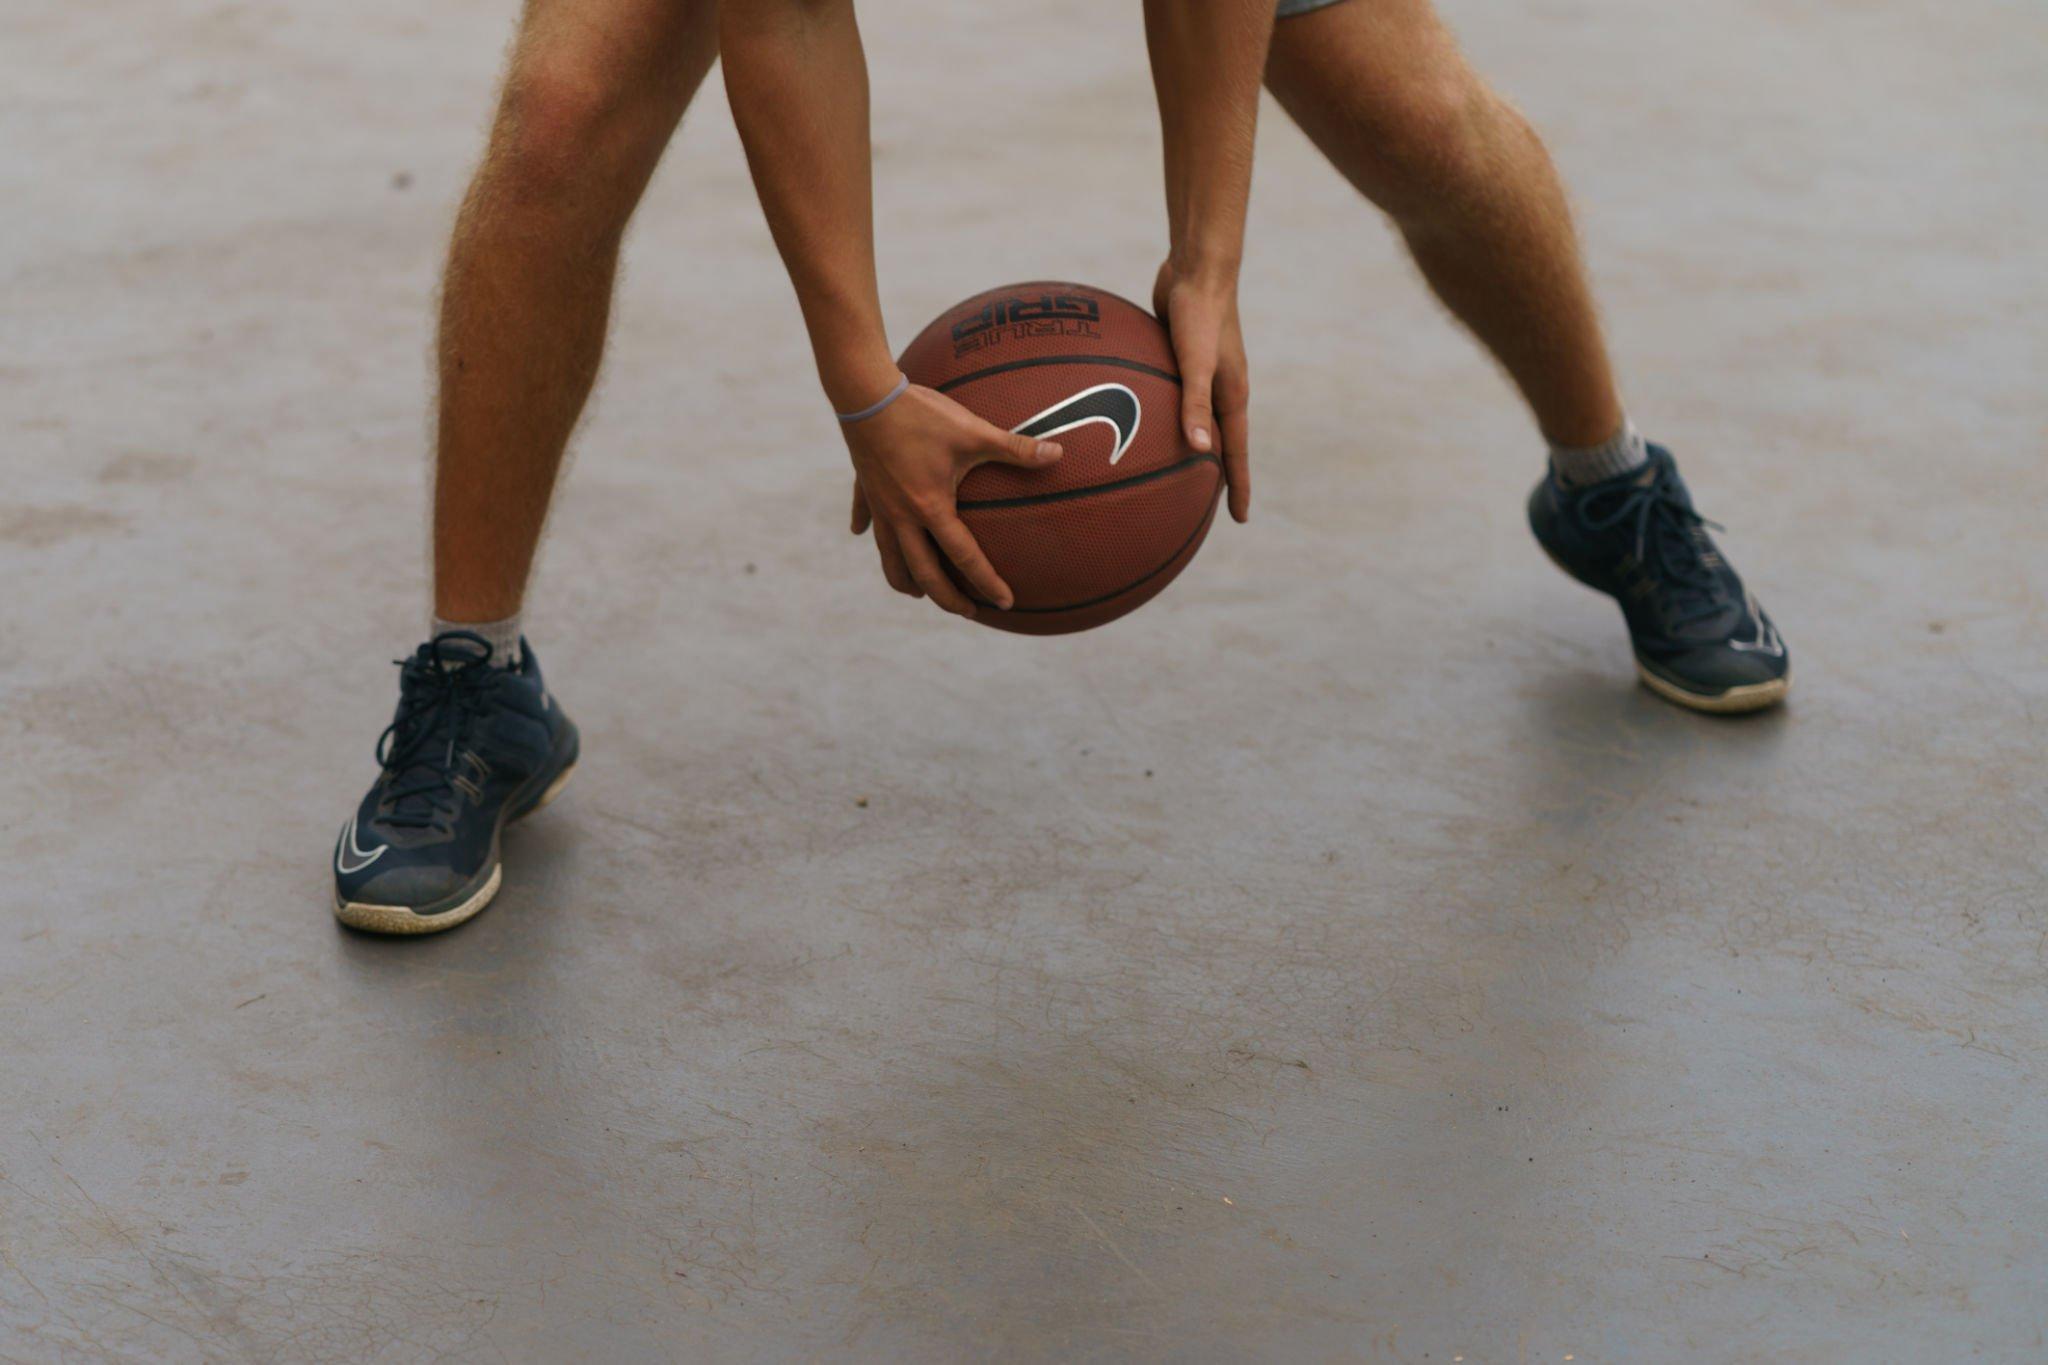 https://www.istockphoto.com/photo/somebody-play-basketball-on-the-street-gm1375247334-442367443?phrase=nike%20shoes